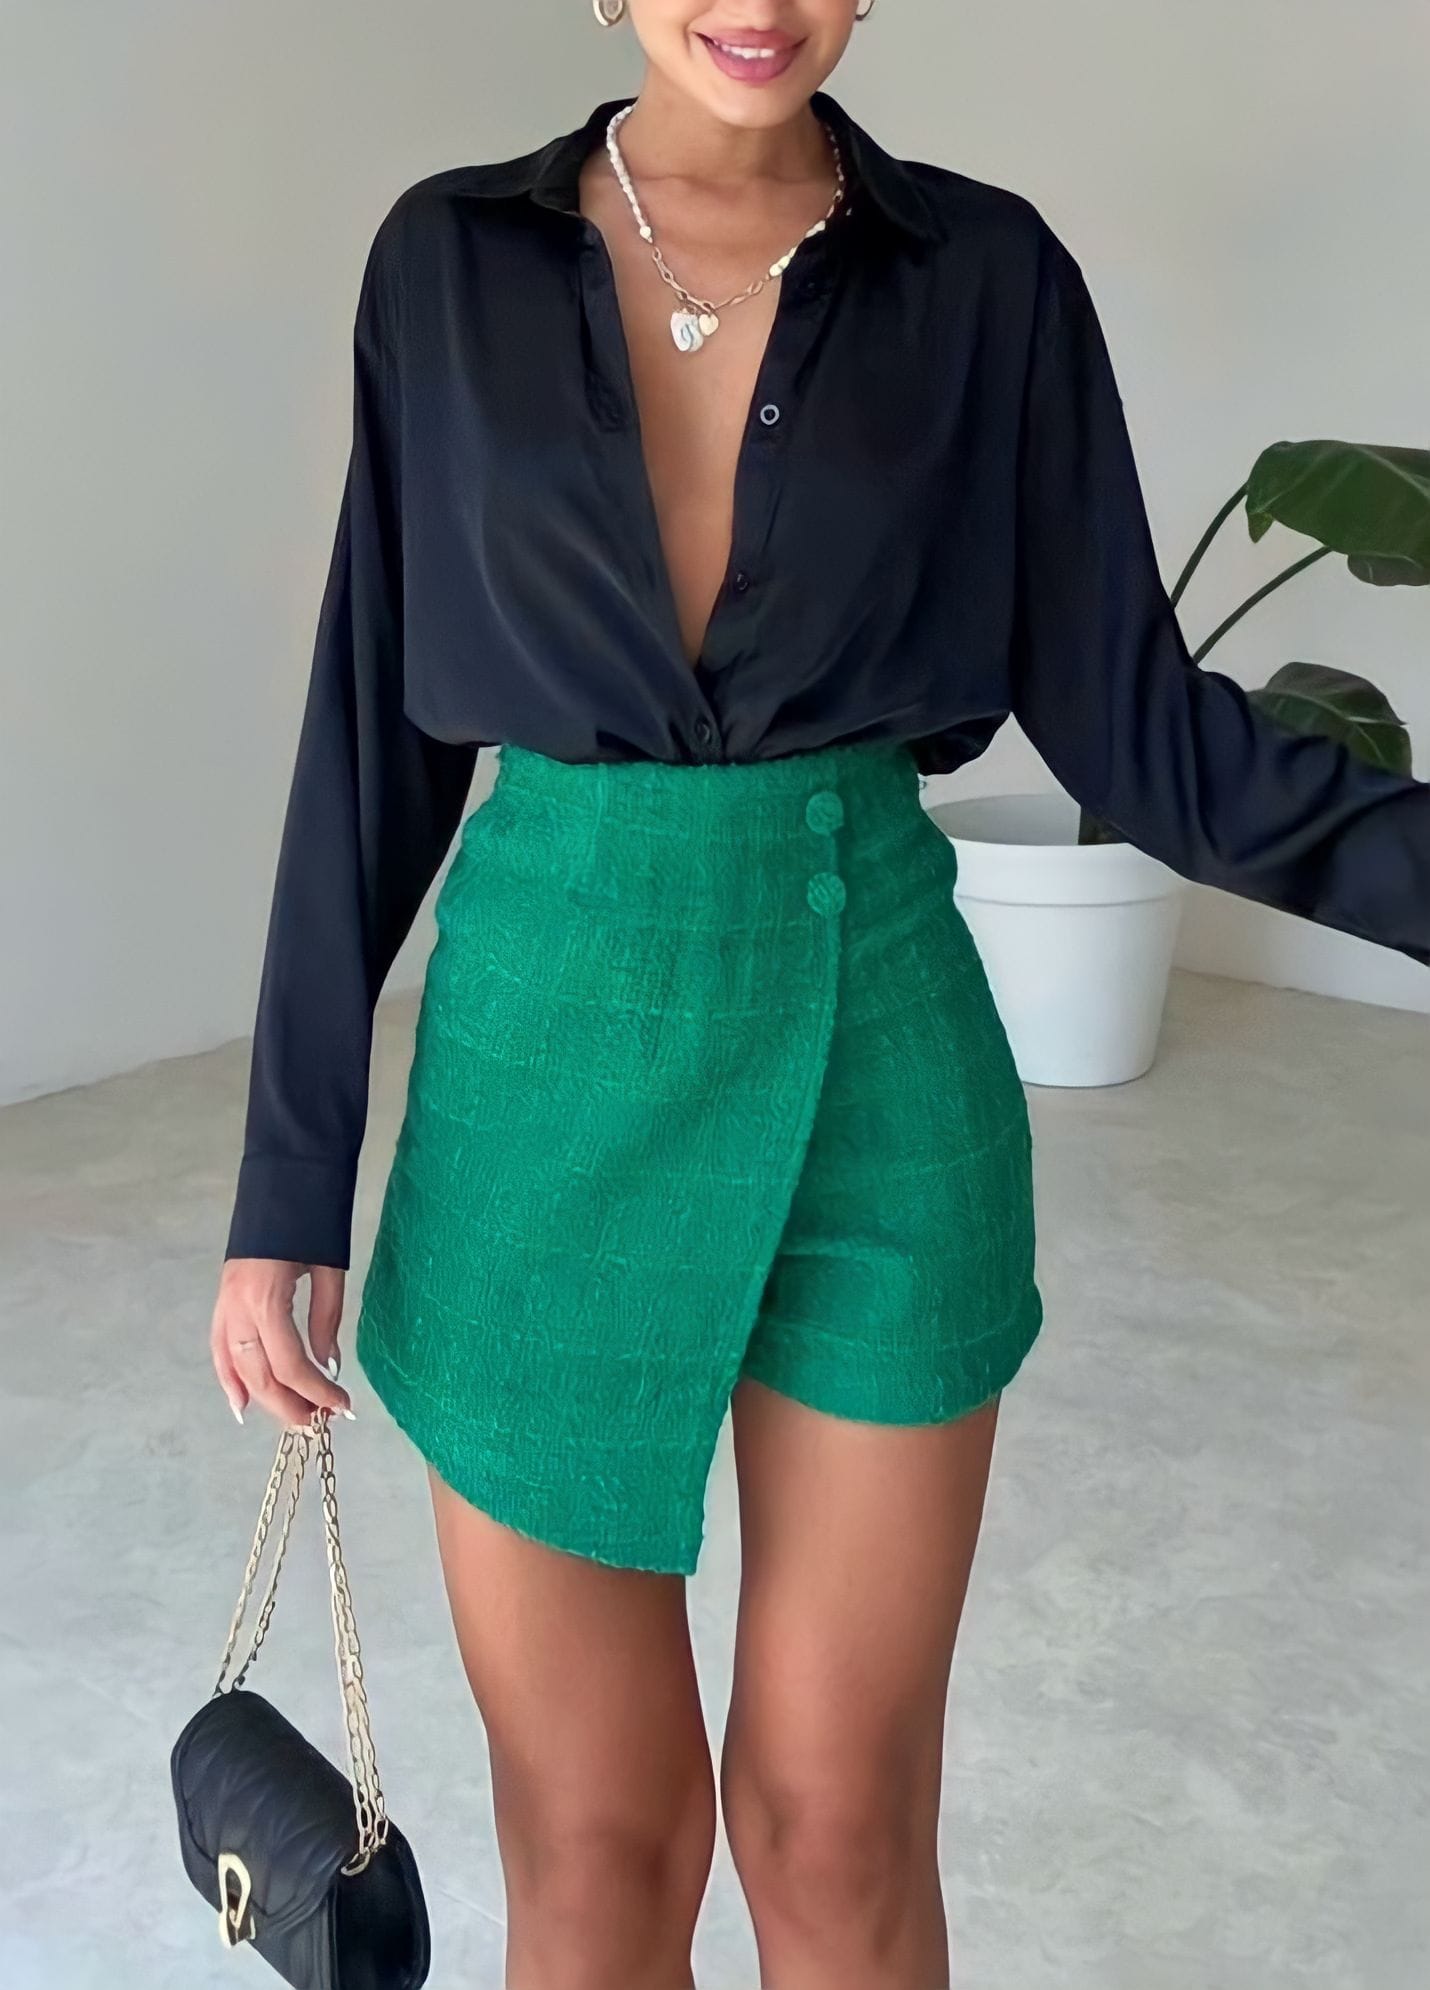 900+ Skirts & Shorts for Women ideas